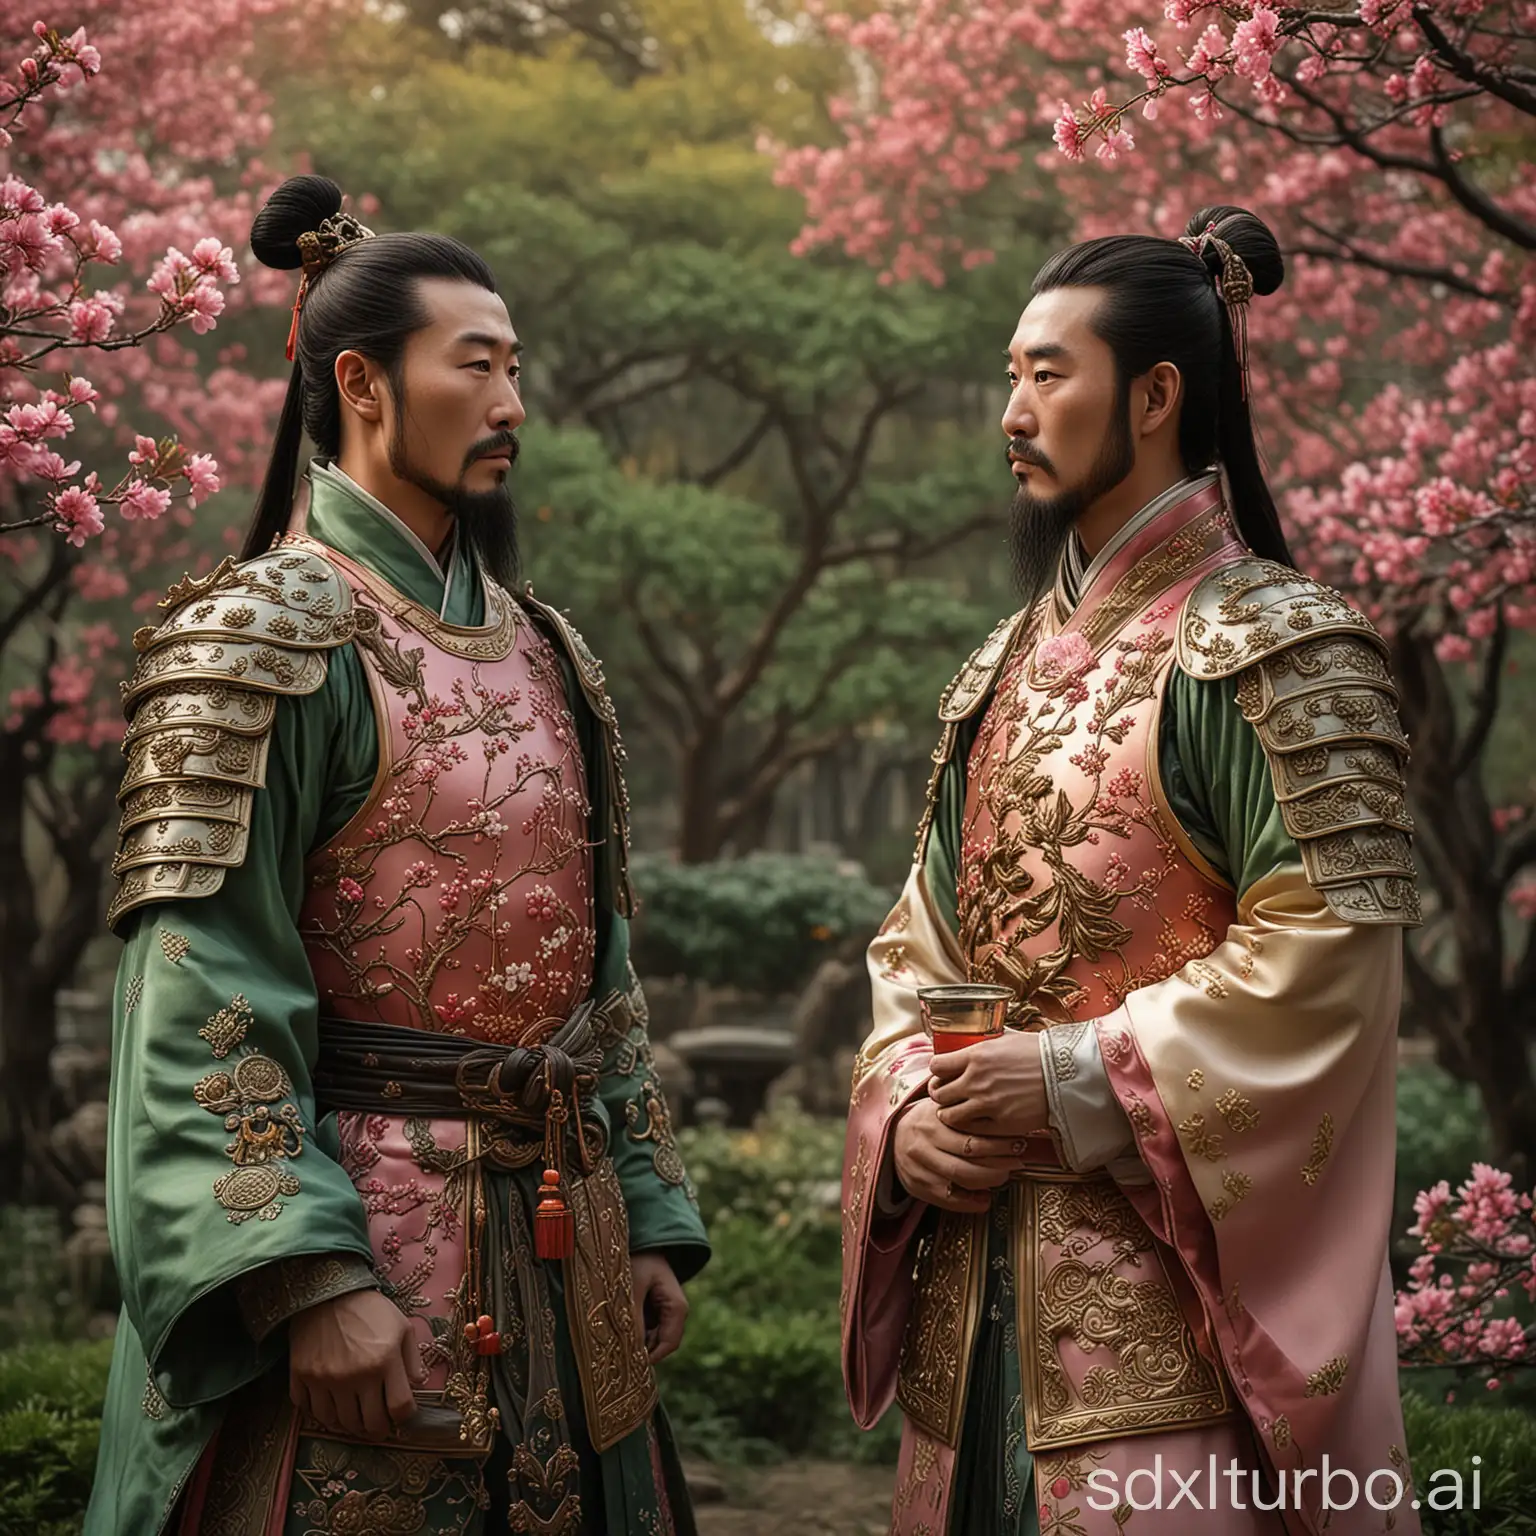 A photorealistic scene set against the backdrop of the Three Kingdoms period, depicting the moment where Liu Bei, Guan Yu, and Zhang Fei decide to join forces in the Oath of the Peach Garden (Taoyuan). The three warriors stand together in a lush, blooming peach garden, the trees heavy with vibrant pink blossoms: Liu Bei stands at the center, his elaborate traditional armor and flowing robes detailed with intricate designs. He holds a cup of wine, his face reflecting determination and the weight of his promise. The light filtering through the blossoms casts a warm glow on his resolute expression. Guan Yu, on Liu Bei’s right, is dressed in his iconic green robe and ornate armor. His long beard flows gently in the breeze, and his eyes are fierce yet solemn, reflecting his unwavering loyalty. He too holds a cup of wine, raised in a gesture of solidarity. Zhang Fei, on Liu Bei’s left, is clad in rugged, distinctive armor. His robust physique and intense gaze underscore his warrior spirit and fierce loyalty. He grips his cup firmly, ready to make the solemn vow alongside his brothers. The peach blossoms around them are rendered in exquisite detail, their vibrant colors contrasting with the warriors’ armor. The garden is bathed in the soft, golden light of late afternoon, enhancing the serene yet momentous atmosphere. The expressions on their faces and the intricate designs on their armor are depicted with photorealistic precision, capturing the profound significance and emotional depth of this historic alliance.